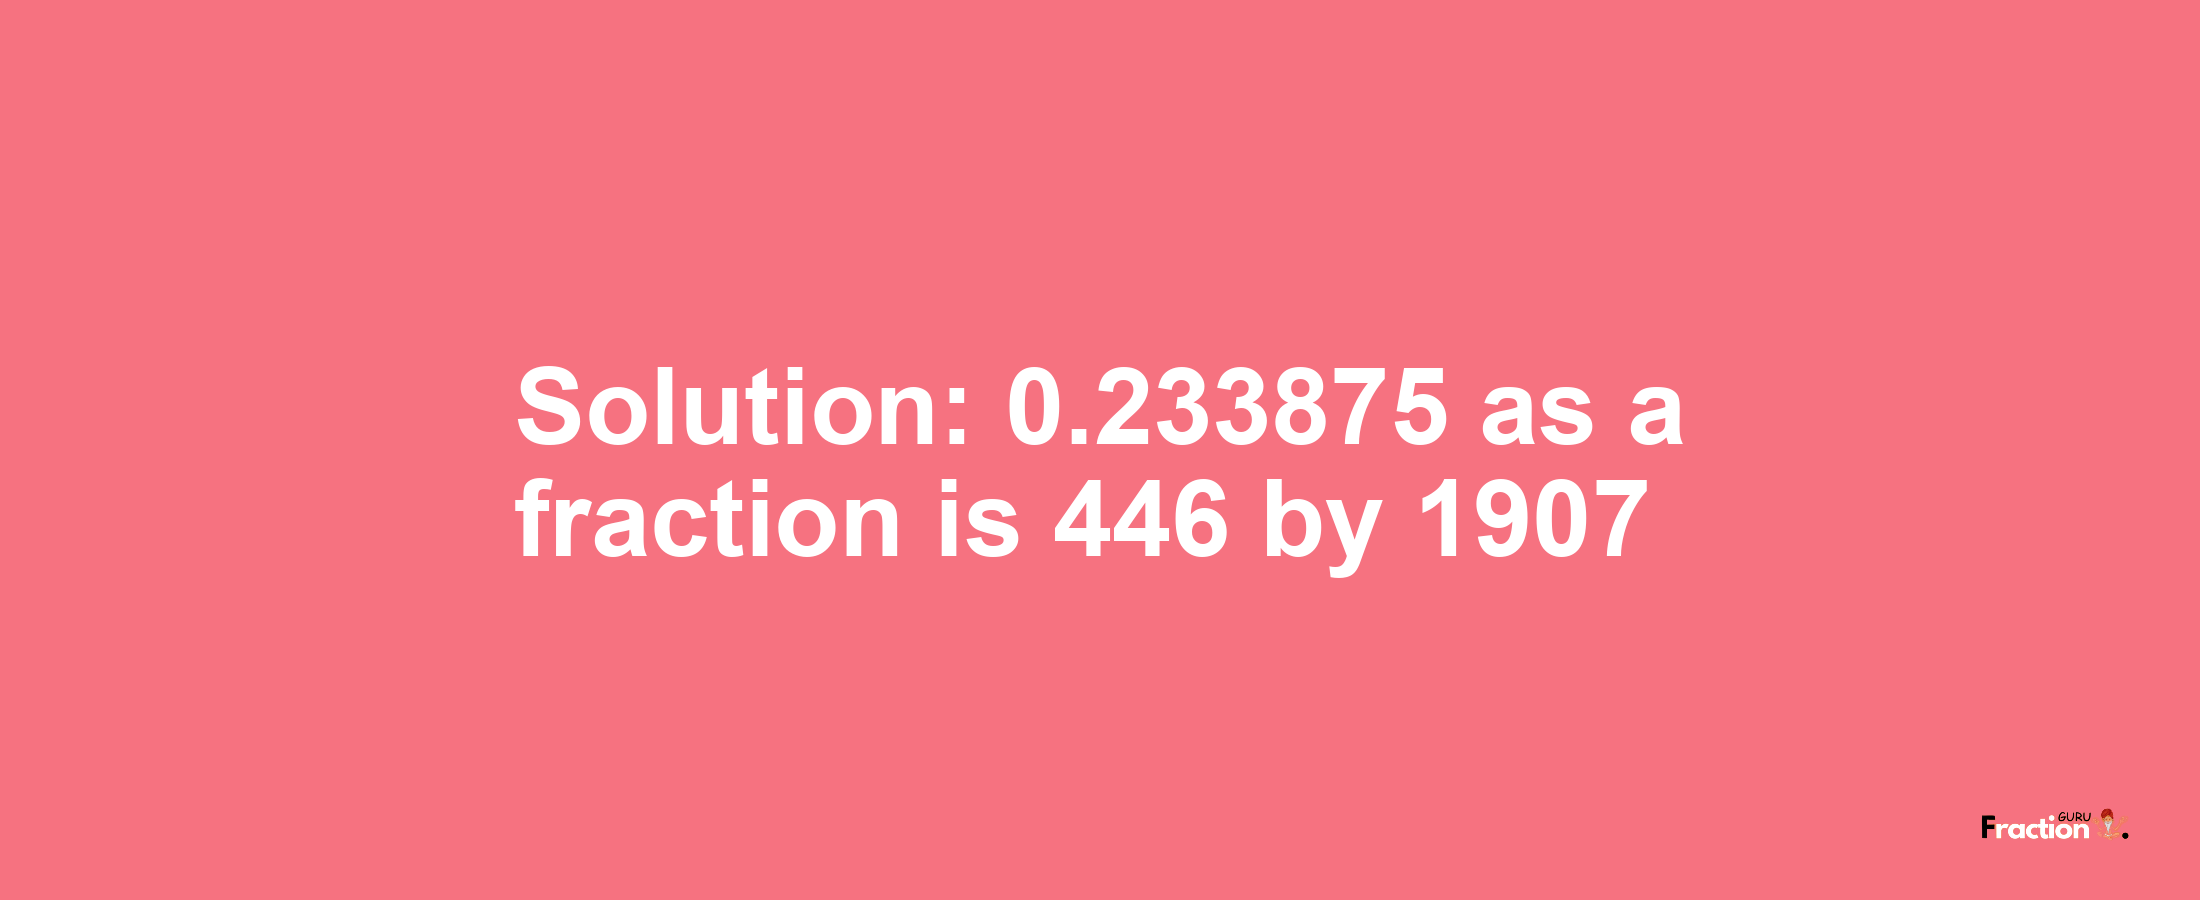 Solution:0.233875 as a fraction is 446/1907